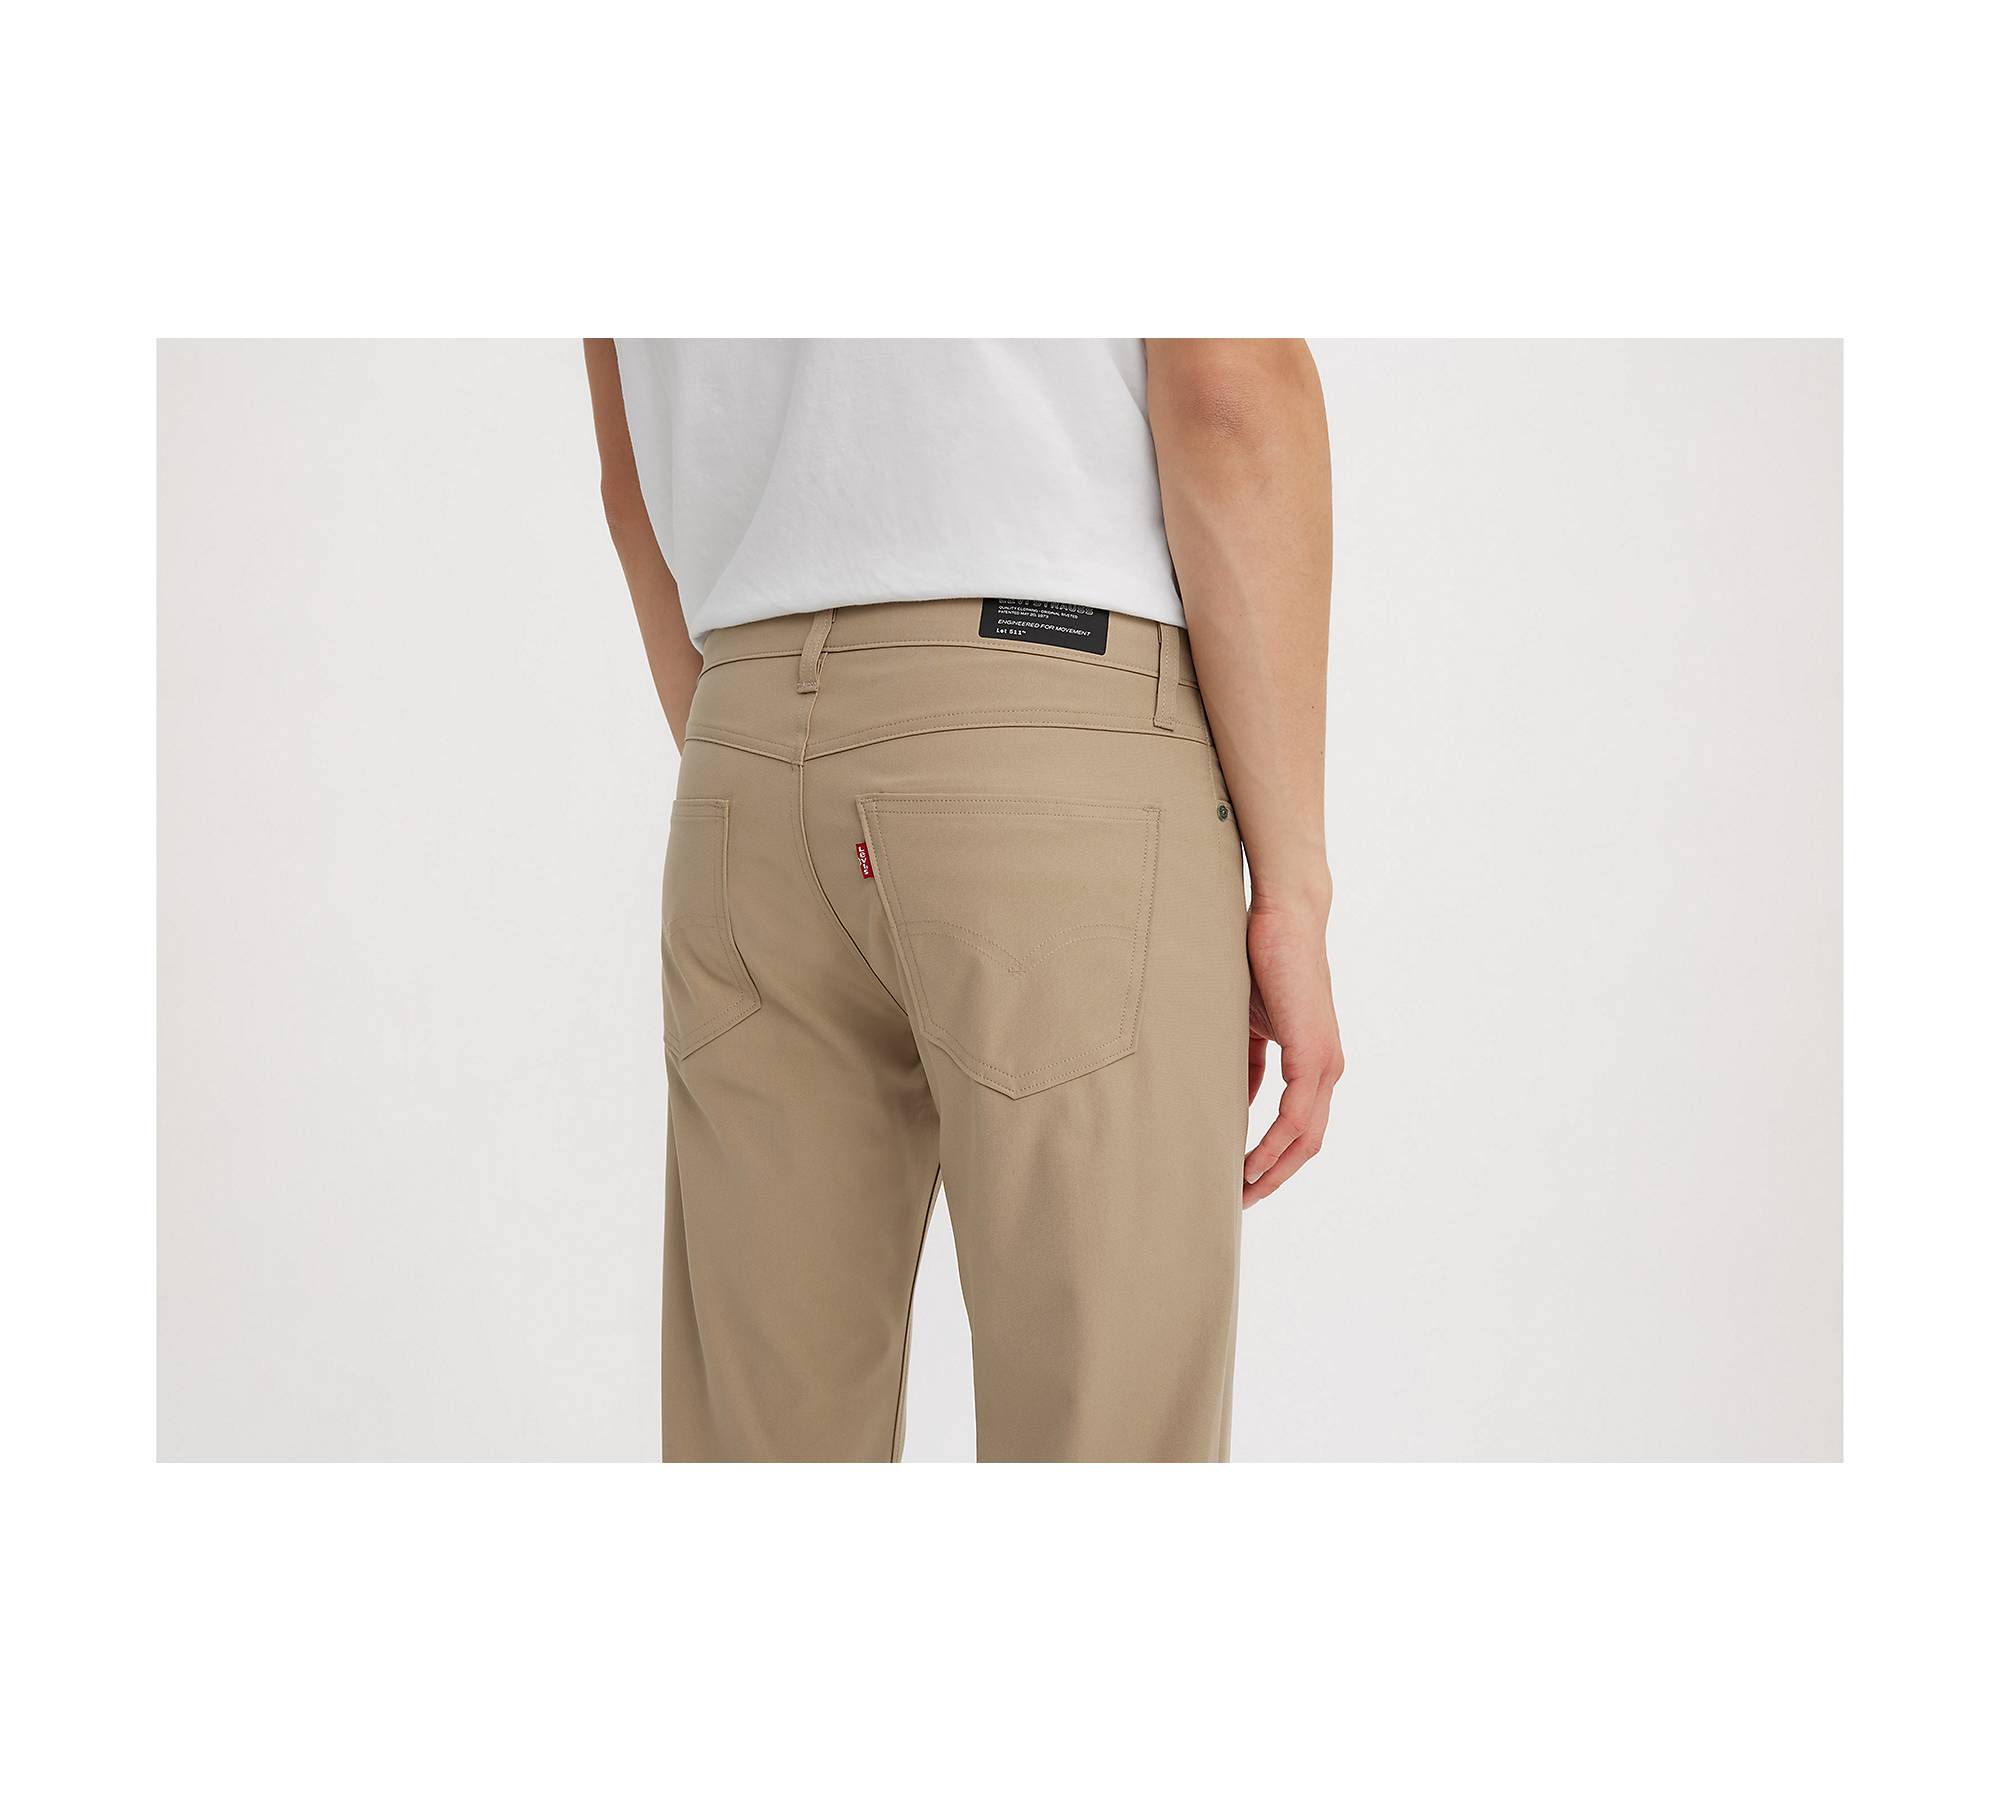 Cargo Pants for Men Relaxed Fit Causal Slim Beach Work Streetwear Khaki  Baggy Pants with Zipper Pockets, 01-khaki, Medium : : Clothing,  Shoes & Accessories